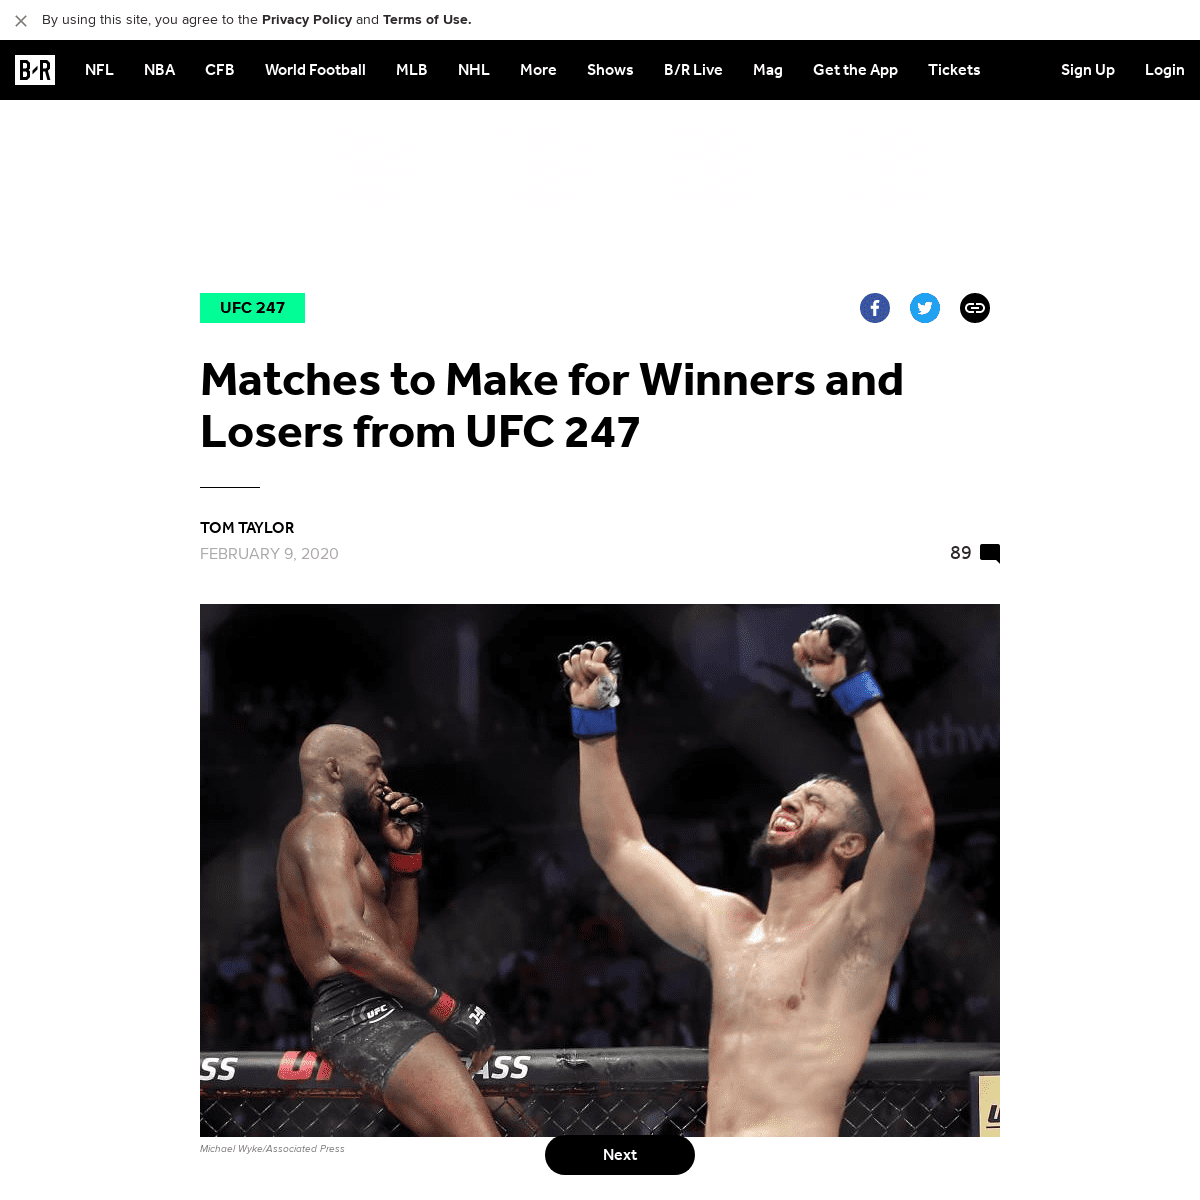 A complete backup of bleacherreport.com/articles/2875483-matches-to-make-for-winners-and-losers-from-ufc-247